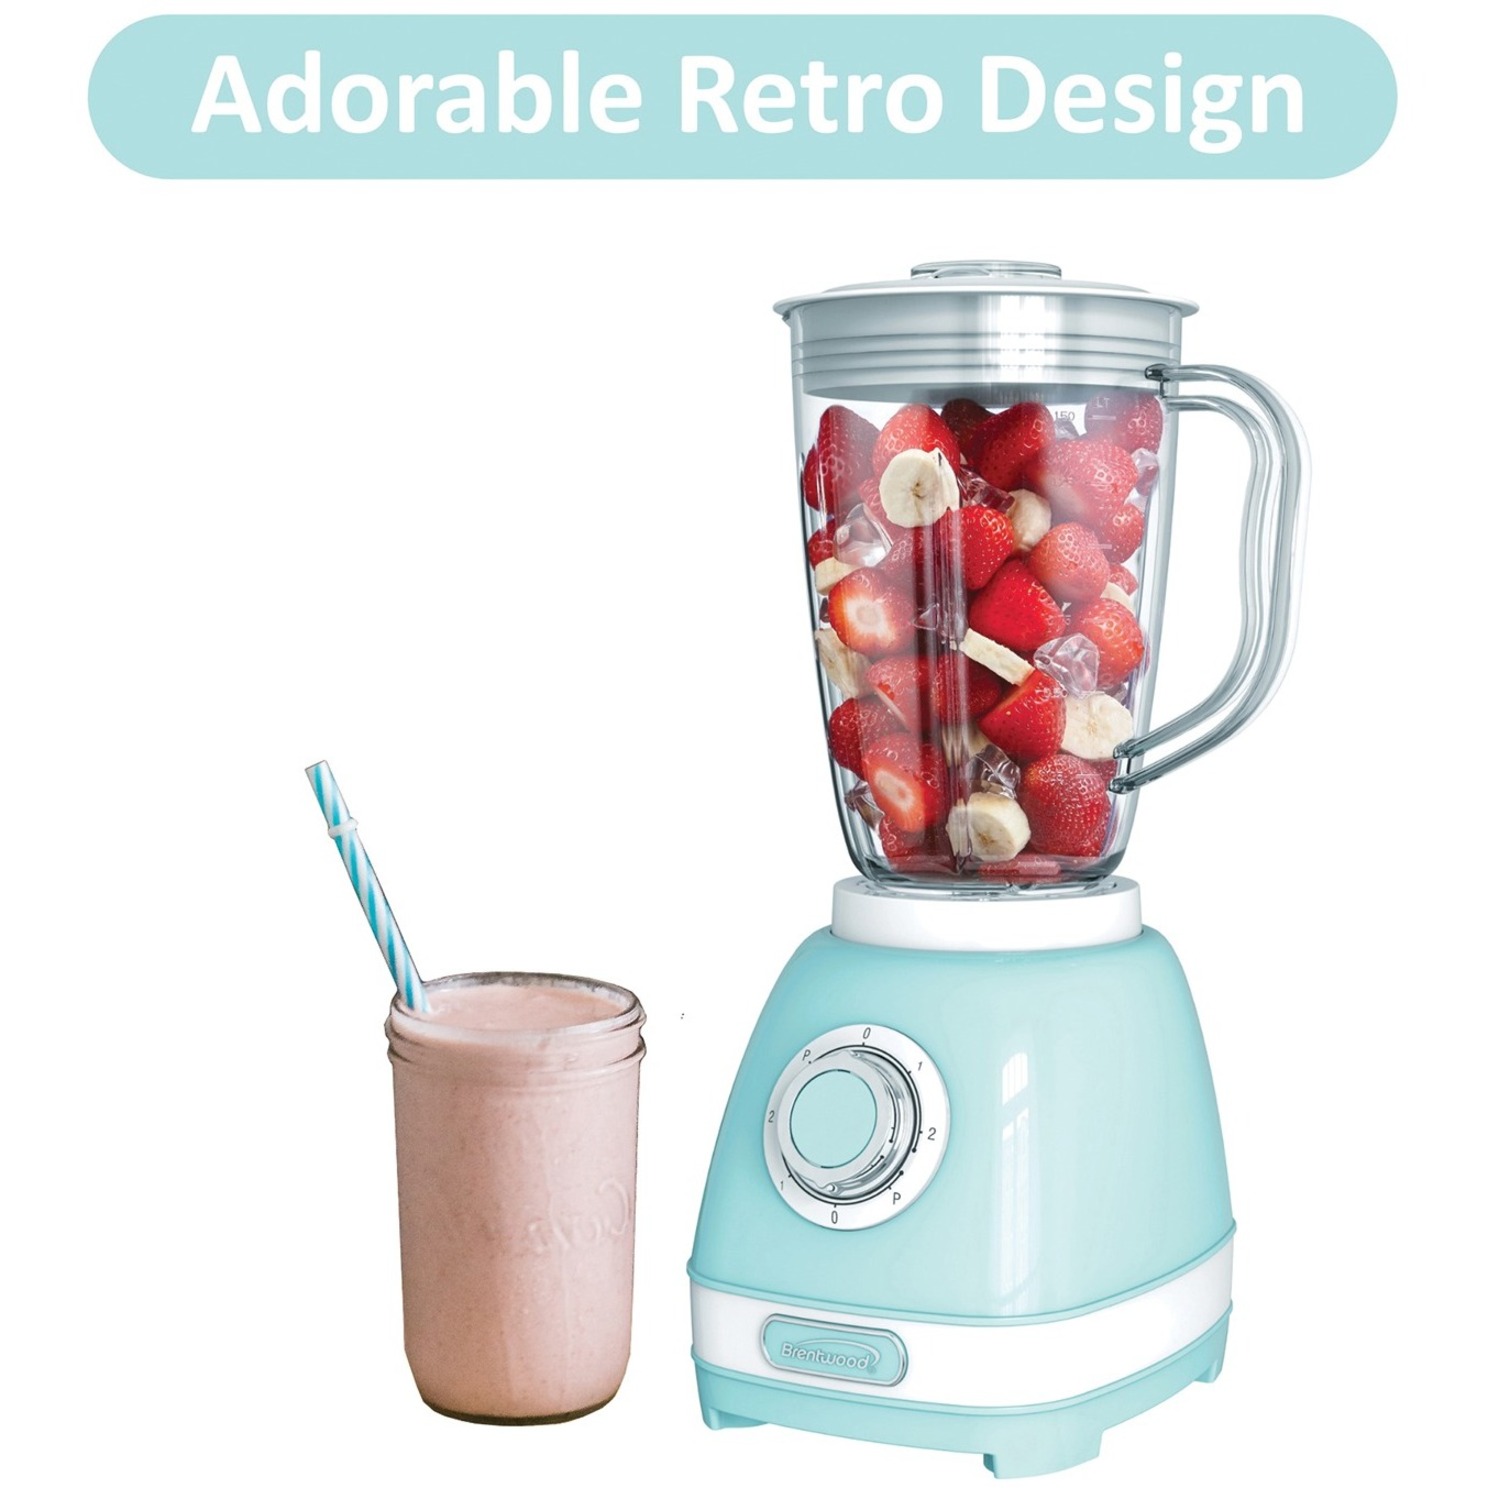 Brentwood Appliances Jb-330bl 2-speed Retro Blender With 50-Ounce Plastic Jar - image 4 of 7